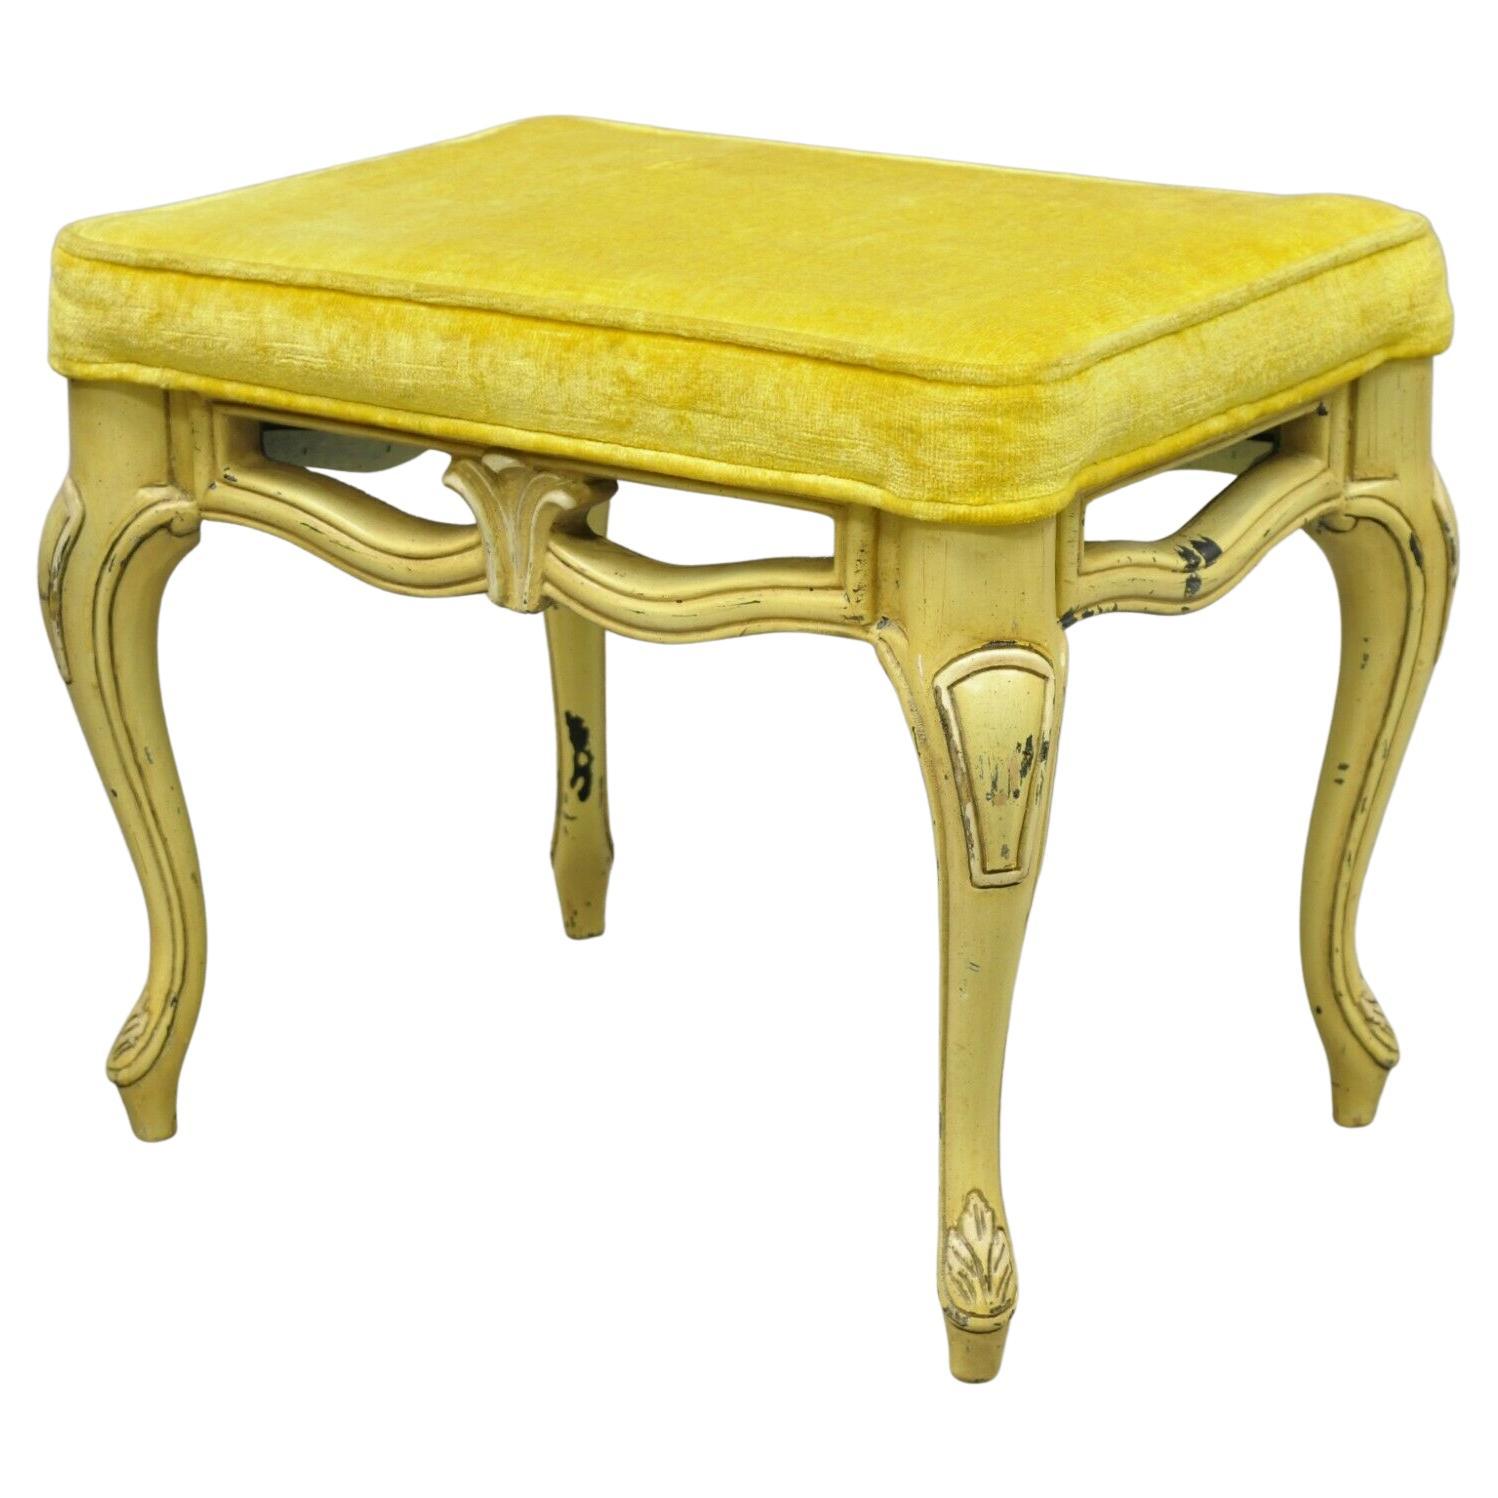 Vintage French Provincial Yellow Painted Cabriole Leg Vanity Bench Seat For Sale